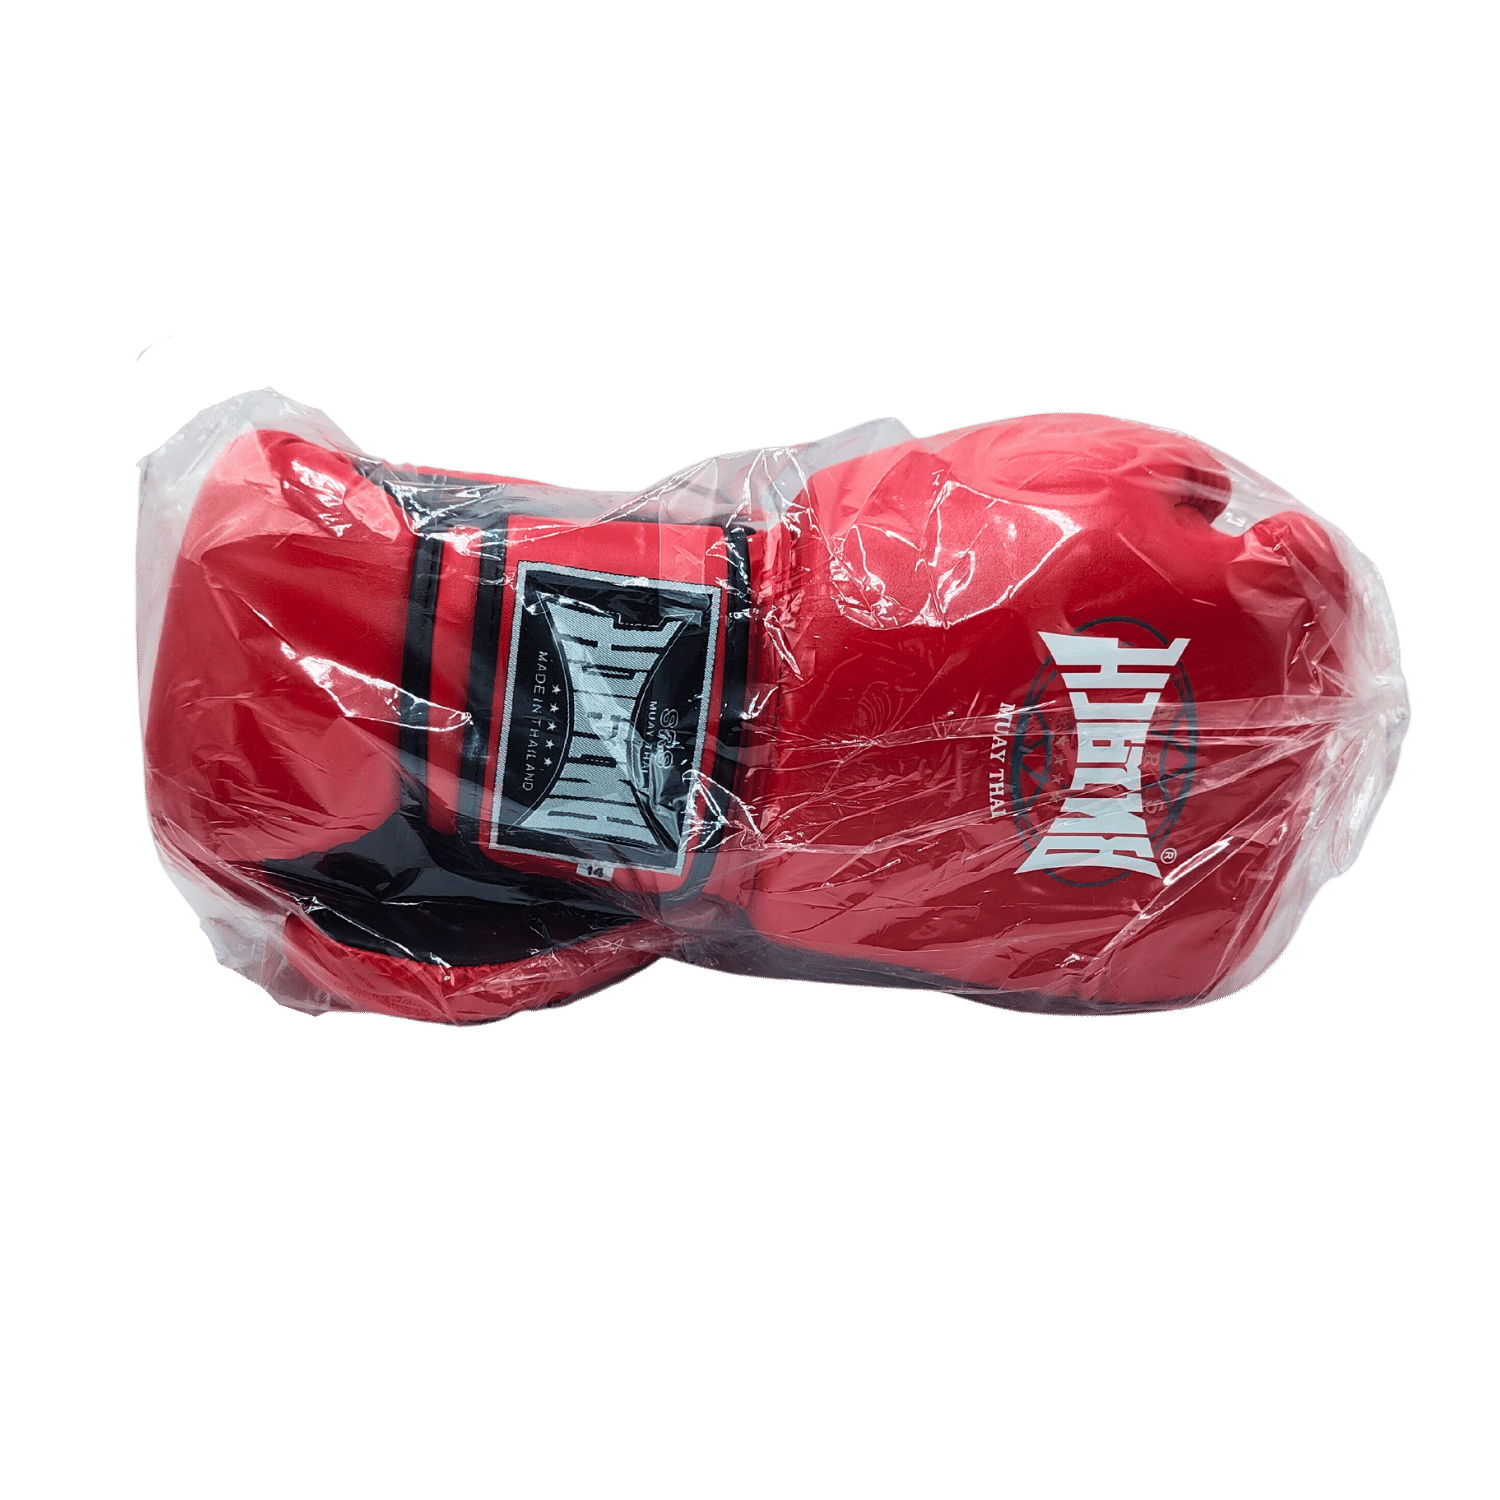 A pair of Muay Thai Boxing Gloves - Red by the Muay Thai brand on a white background.